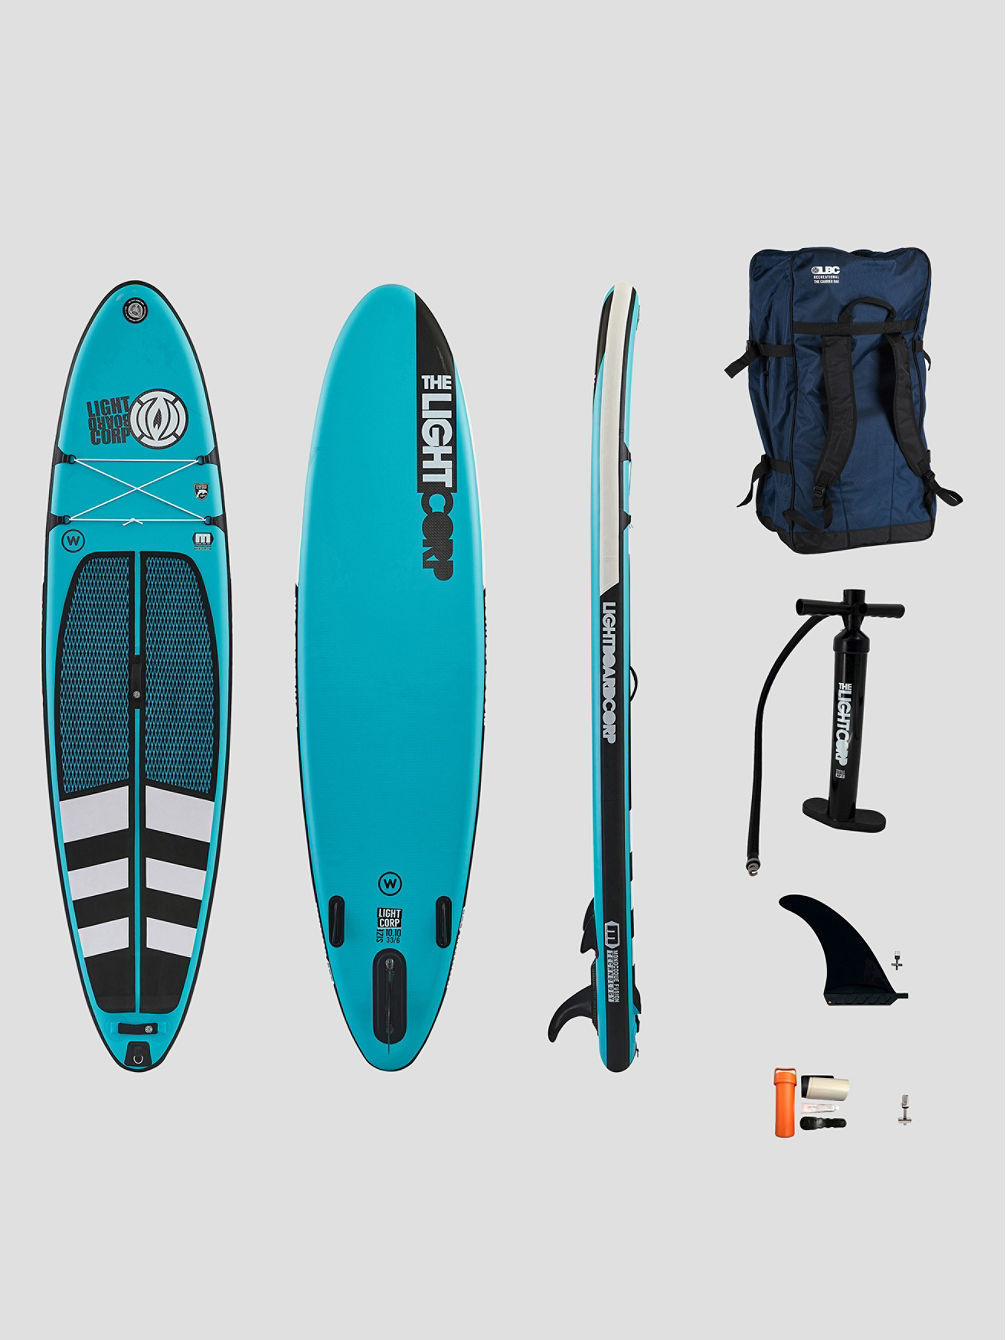 The Blue Series Freeride Wide 10&amp;#039;6 Planche SUP